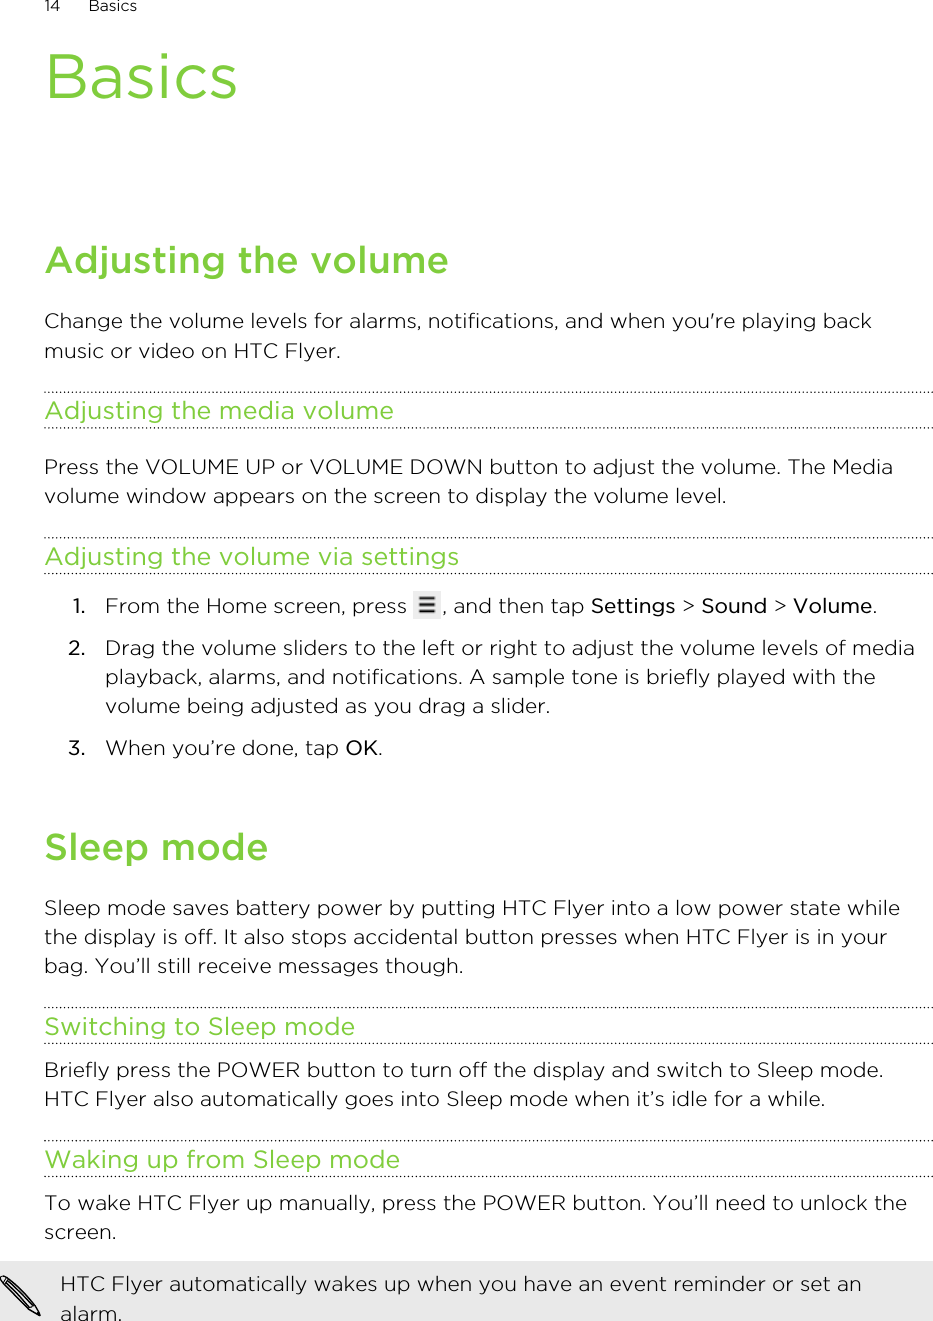 BasicsAdjusting the volumeChange the volume levels for alarms, notifications, and when you&apos;re playing backmusic or video on HTC Flyer.Adjusting the media volumePress the VOLUME UP or VOLUME DOWN button to adjust the volume. The Mediavolume window appears on the screen to display the volume level.Adjusting the volume via settings1. From the Home screen, press  , and then tap Settings &gt; Sound &gt; Volume.2. Drag the volume sliders to the left or right to adjust the volume levels of mediaplayback, alarms, and notifications. A sample tone is briefly played with thevolume being adjusted as you drag a slider.3. When you’re done, tap OK.Sleep modeSleep mode saves battery power by putting HTC Flyer into a low power state whilethe display is off. It also stops accidental button presses when HTC Flyer is in yourbag. You’ll still receive messages though.Switching to Sleep modeBriefly press the POWER button to turn off the display and switch to Sleep mode.HTC Flyer also automatically goes into Sleep mode when it’s idle for a while.Waking up from Sleep modeTo wake HTC Flyer up manually, press the POWER button. You’ll need to unlock thescreen.HTC Flyer automatically wakes up when you have an event reminder or set analarm.14 Basics